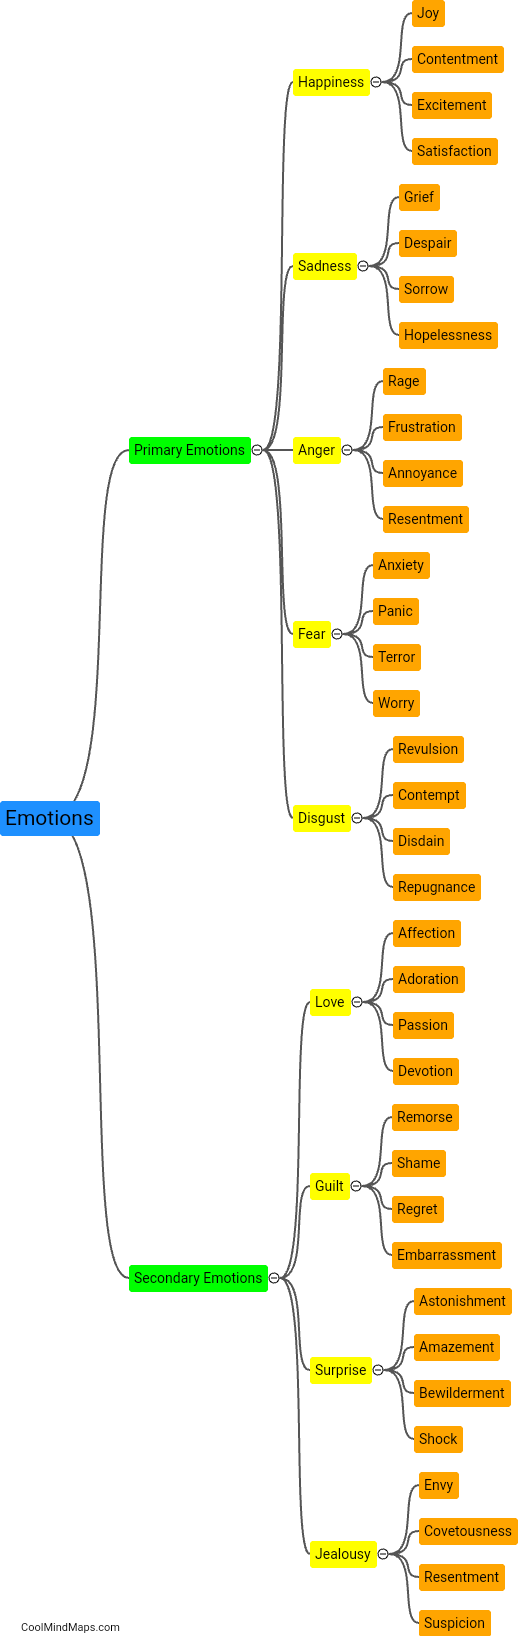 What are different types of emotions?